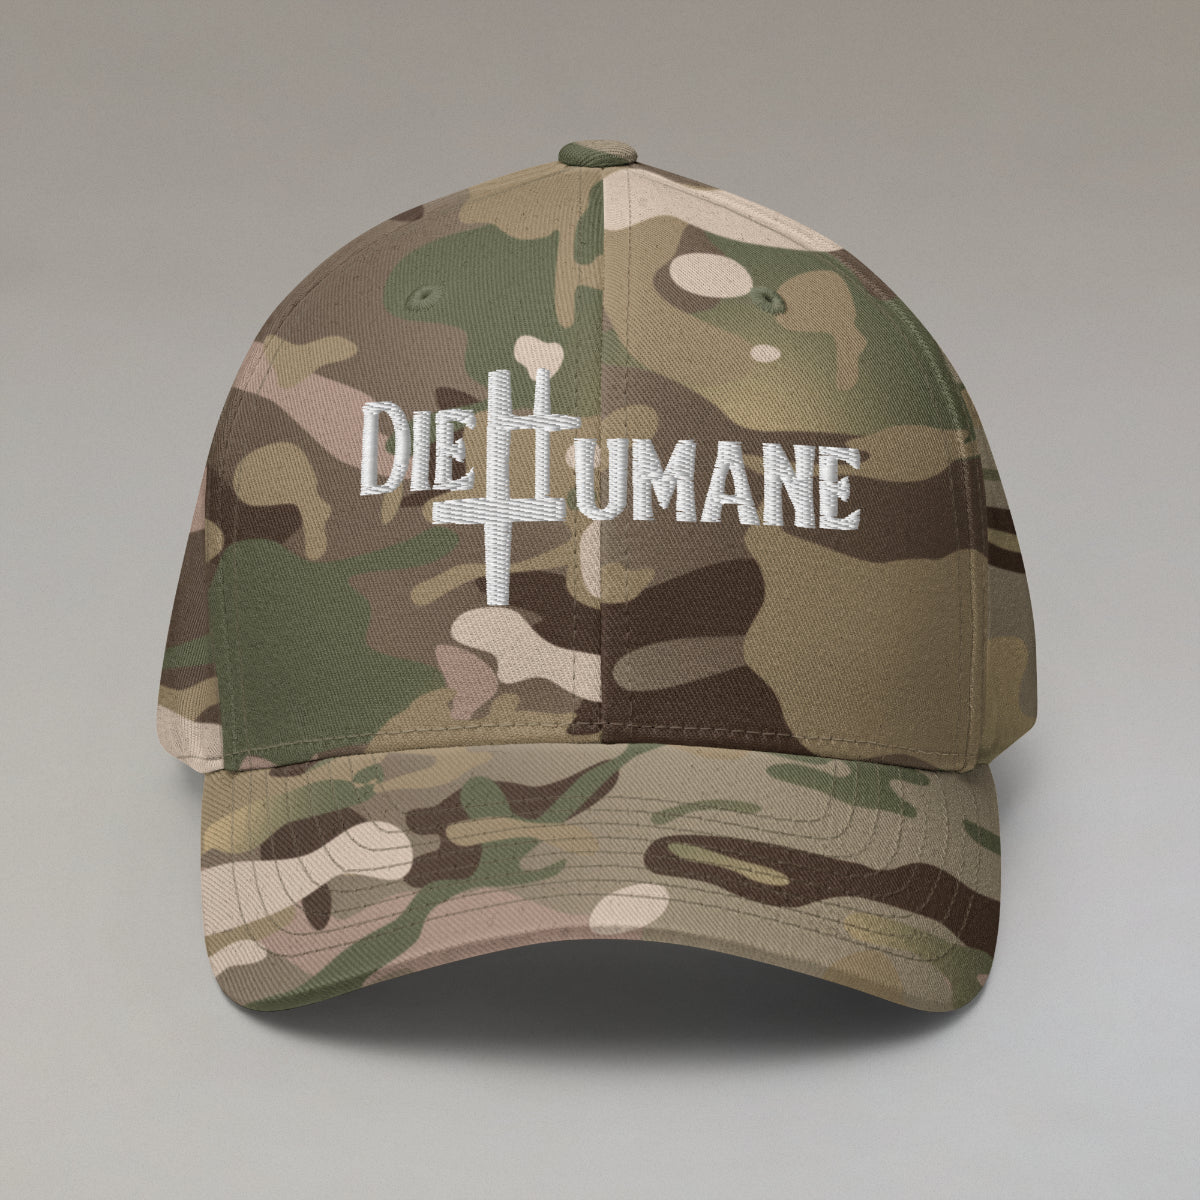 DieHumane hat. Green camo baseball cap with white stitching, embroidery